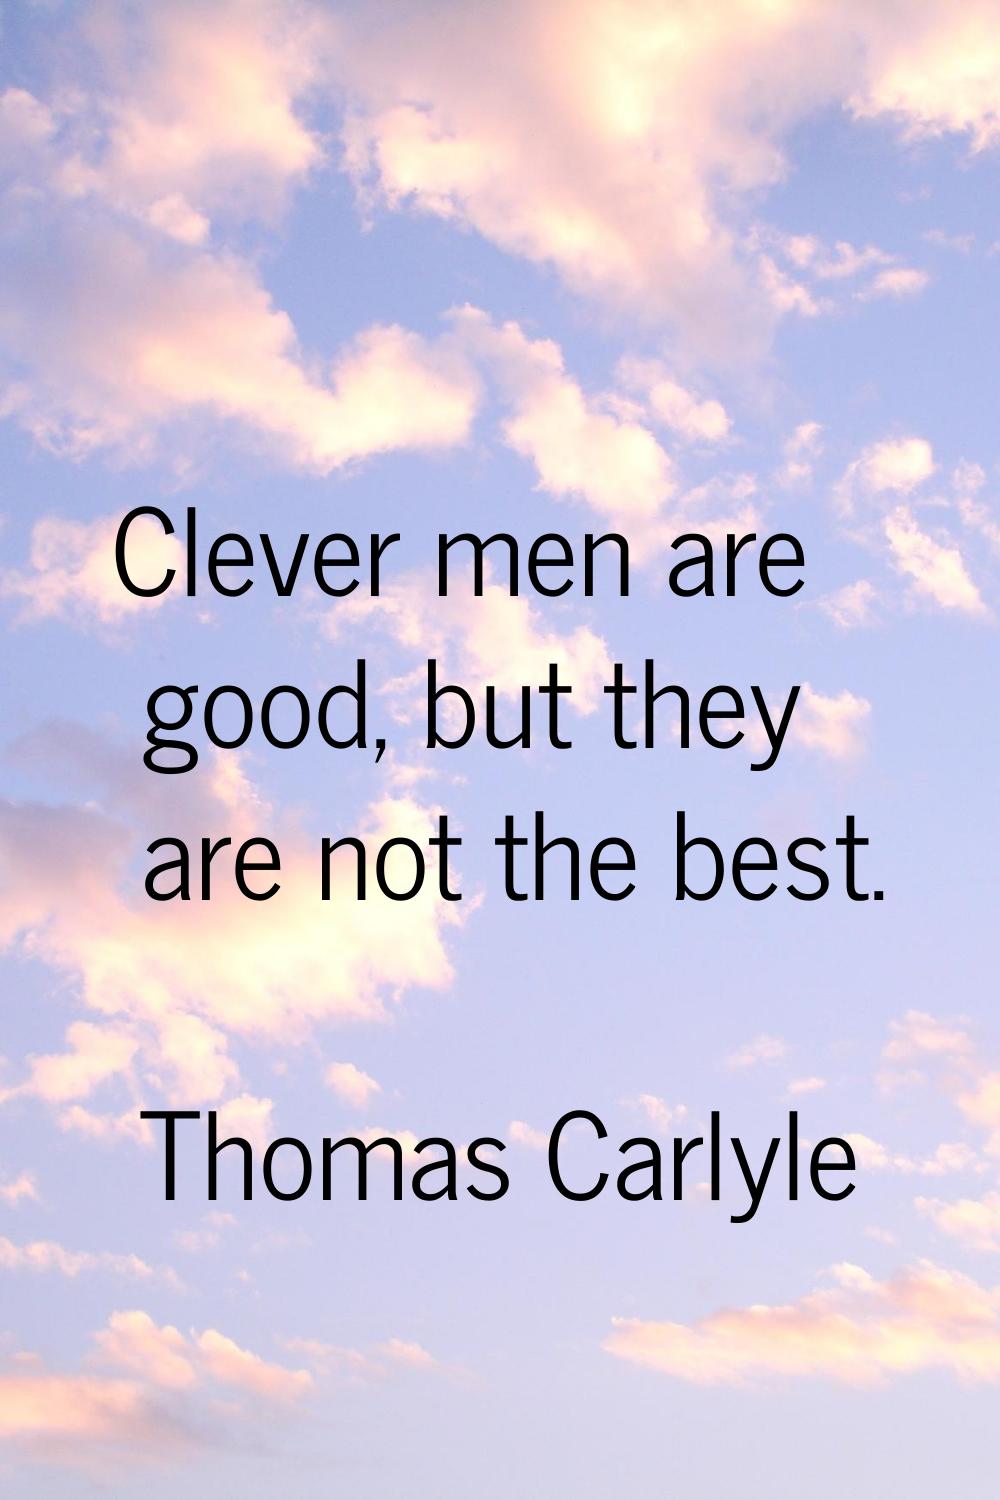 Clever men are good, but they are not the best.